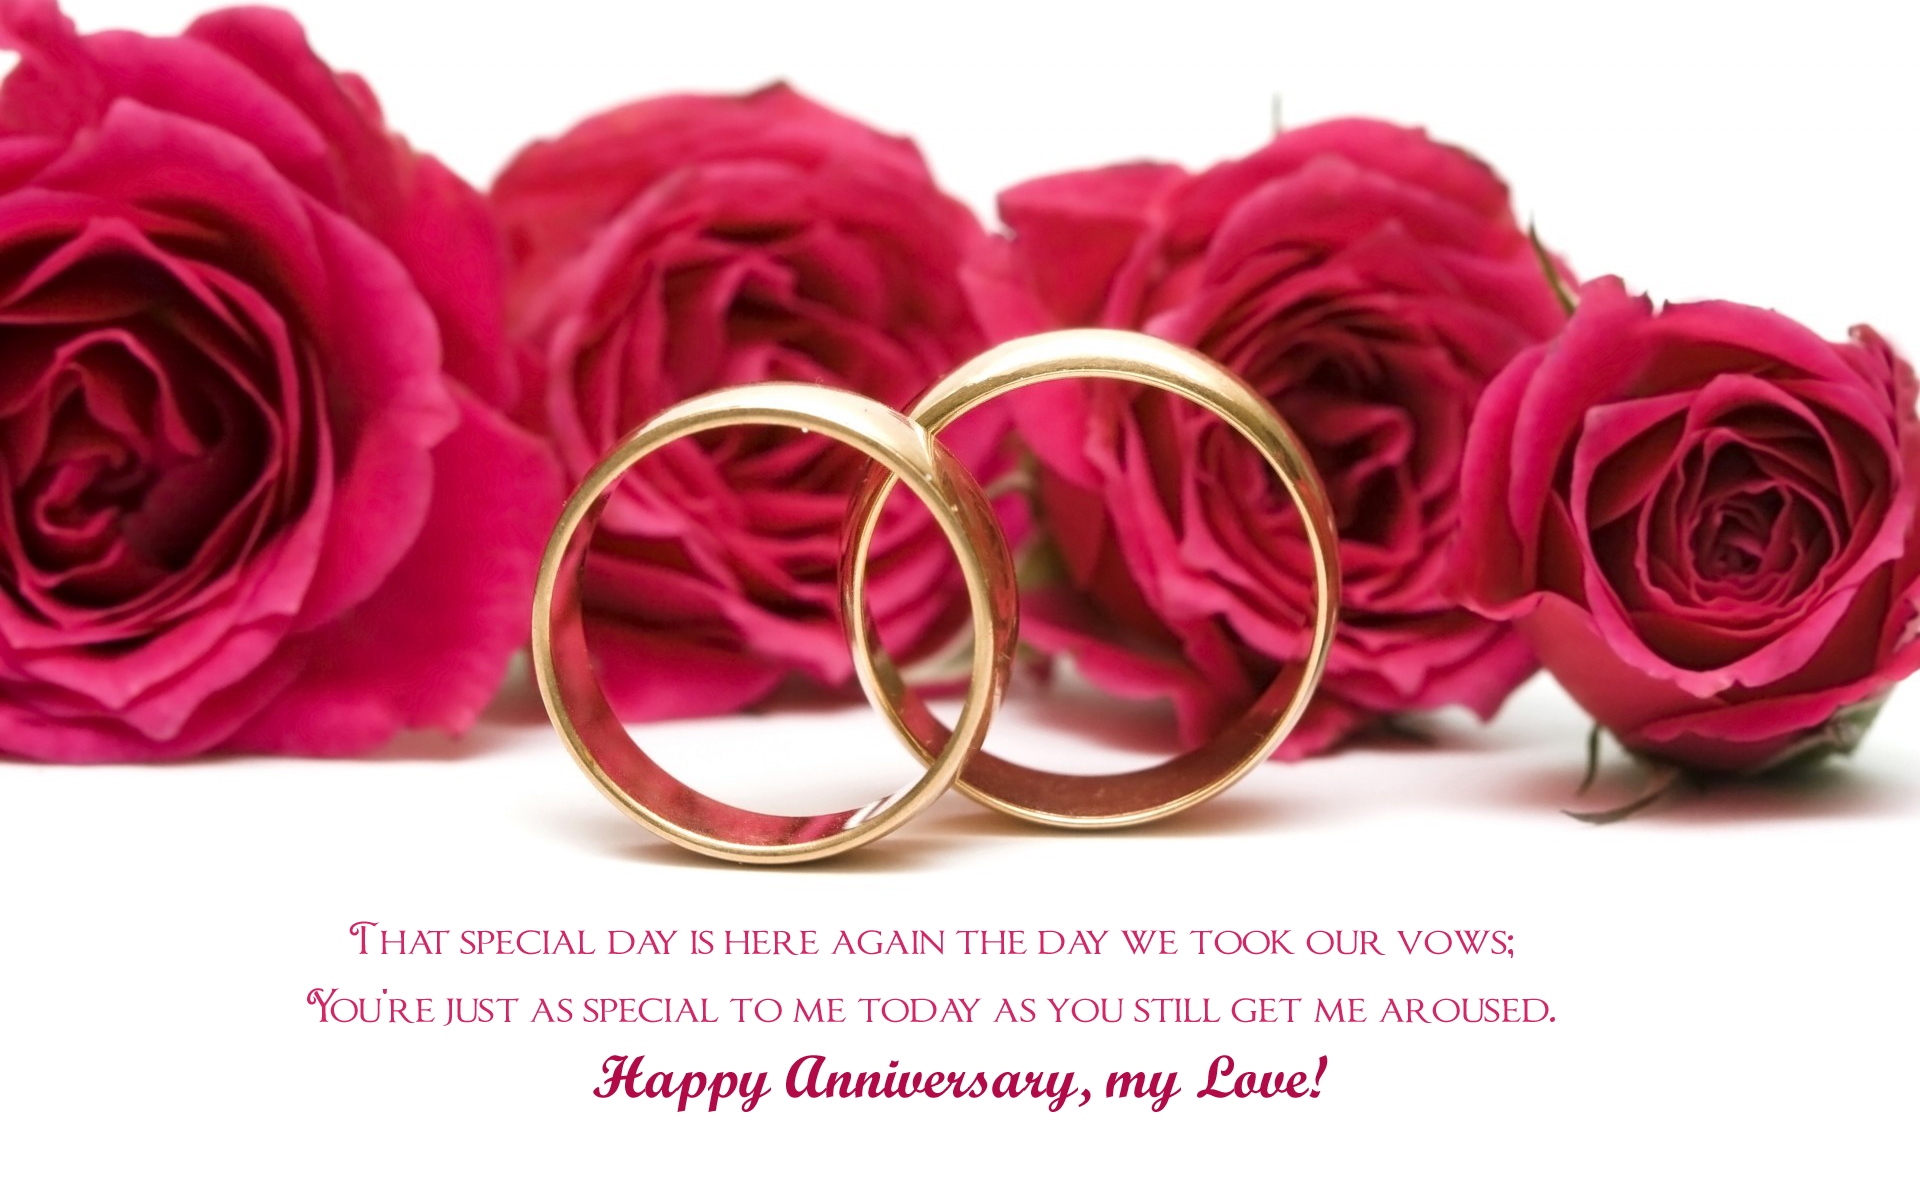 HD desktop wallpaper: Love, Wedding, Rose, Holiday, Ring, Anniversary  download free picture #731498